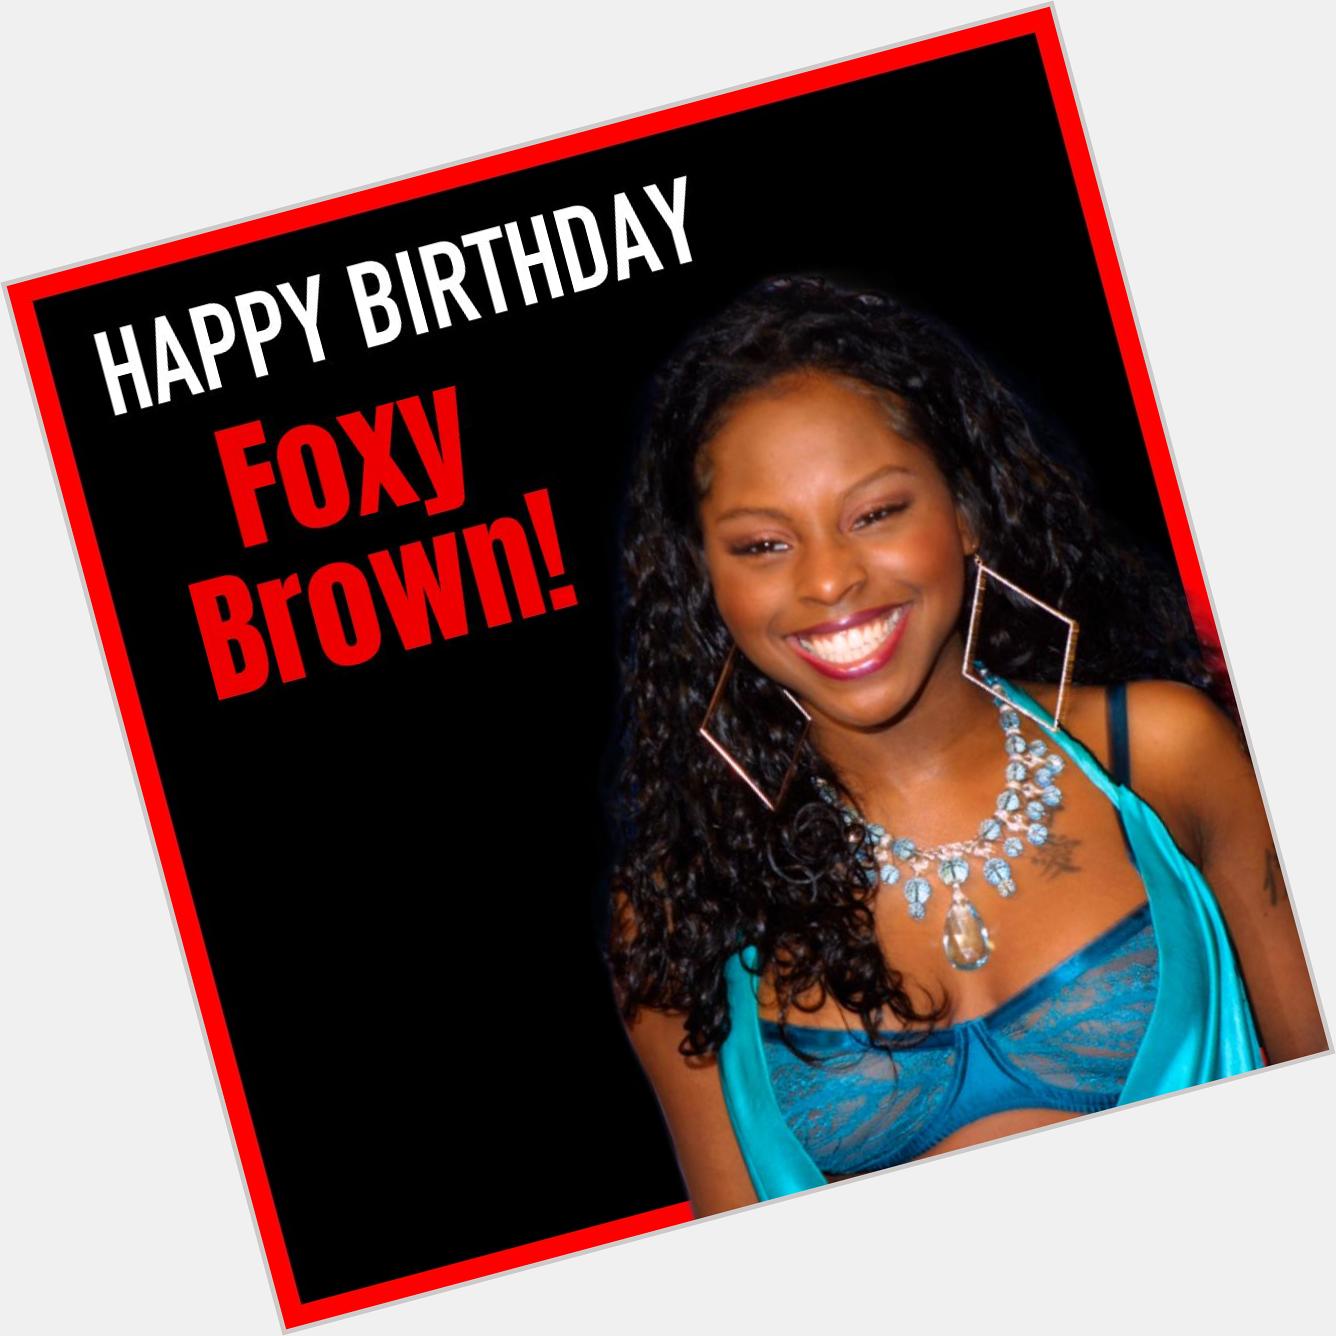 Happy Birthday to Foxy Brown! The rapper turns 41 today. 